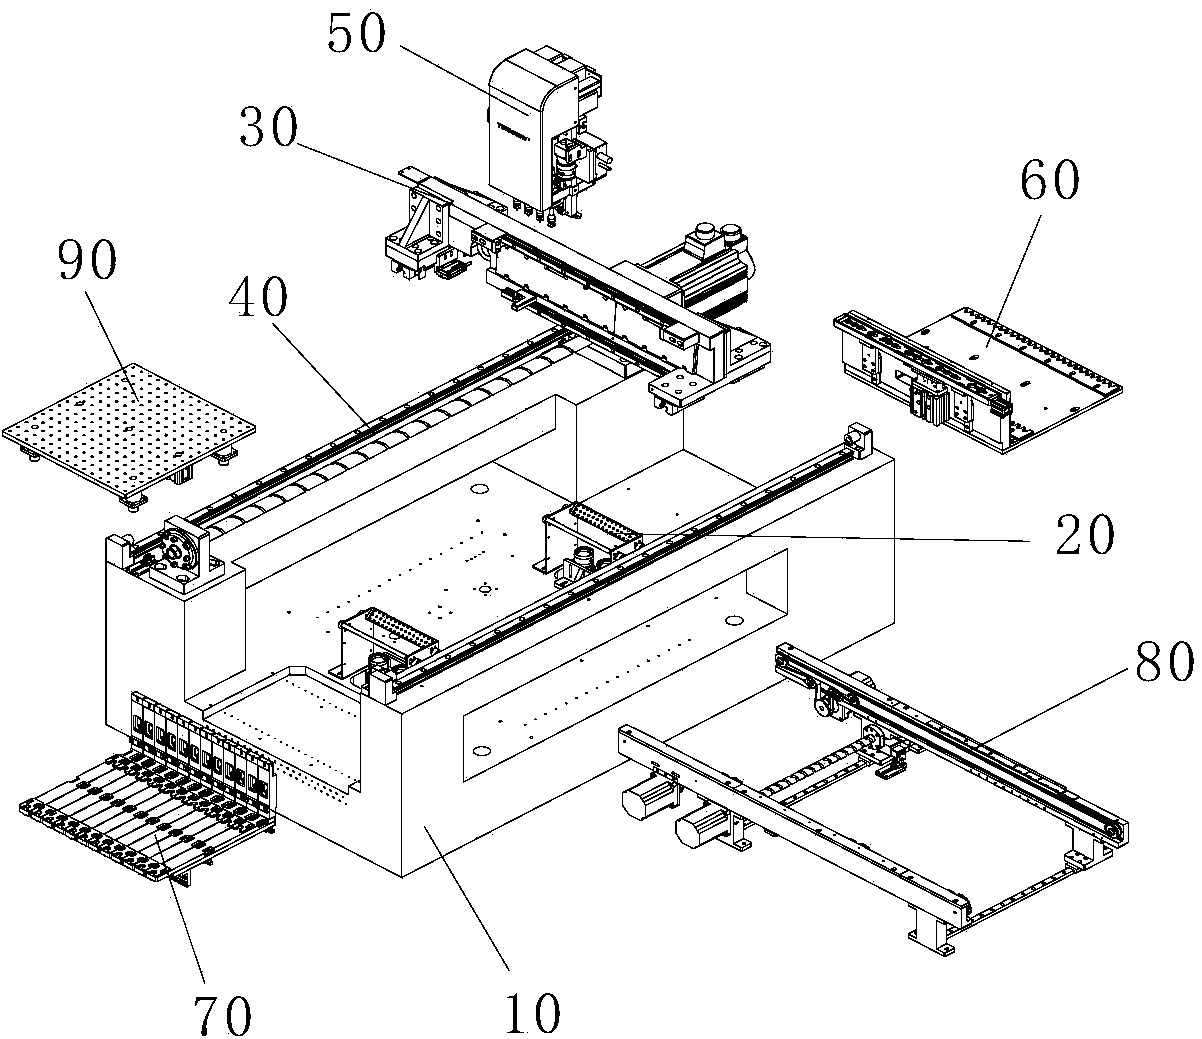 Chip mounter and bottom lens visual system thereof